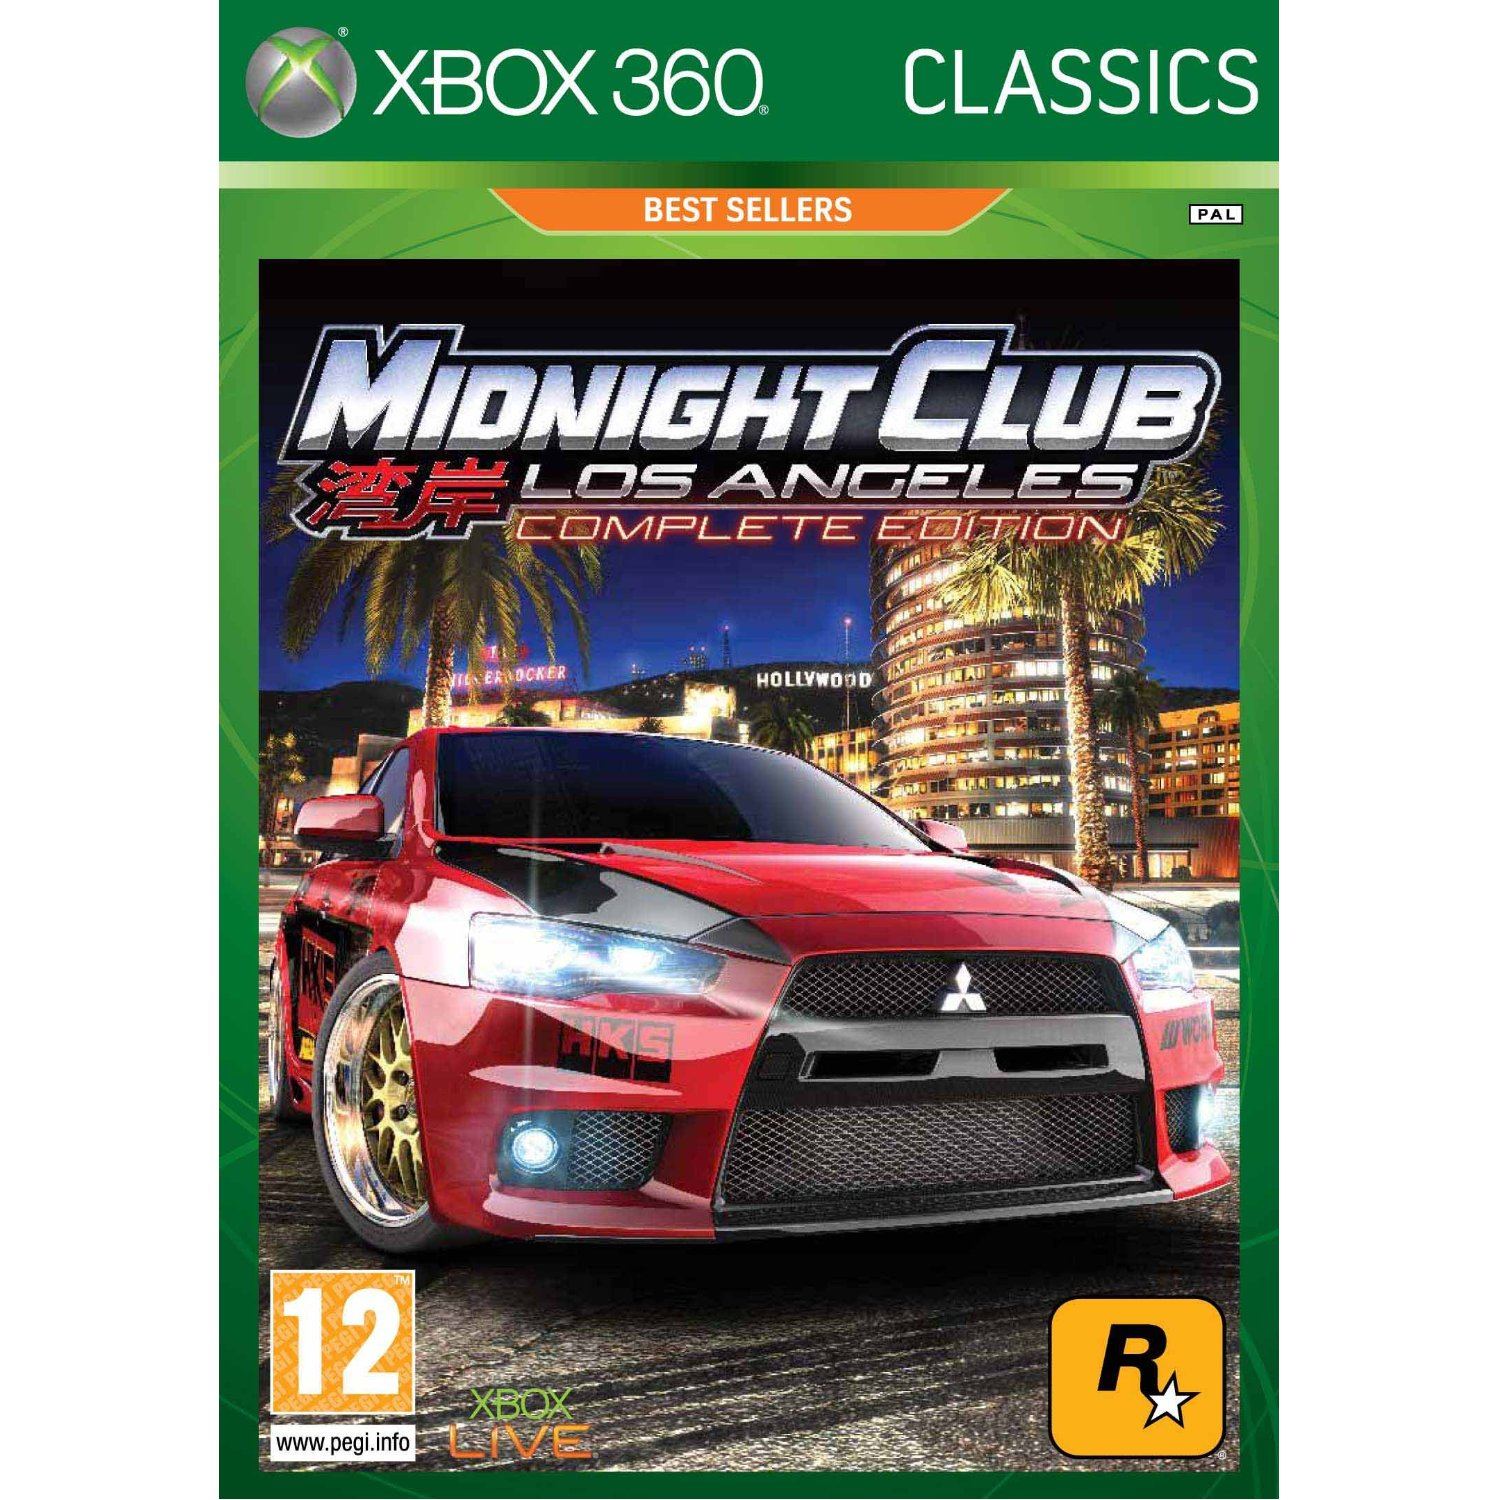 Midnight Club: Los Angeles (Complete Edition - Classics) (Europe)